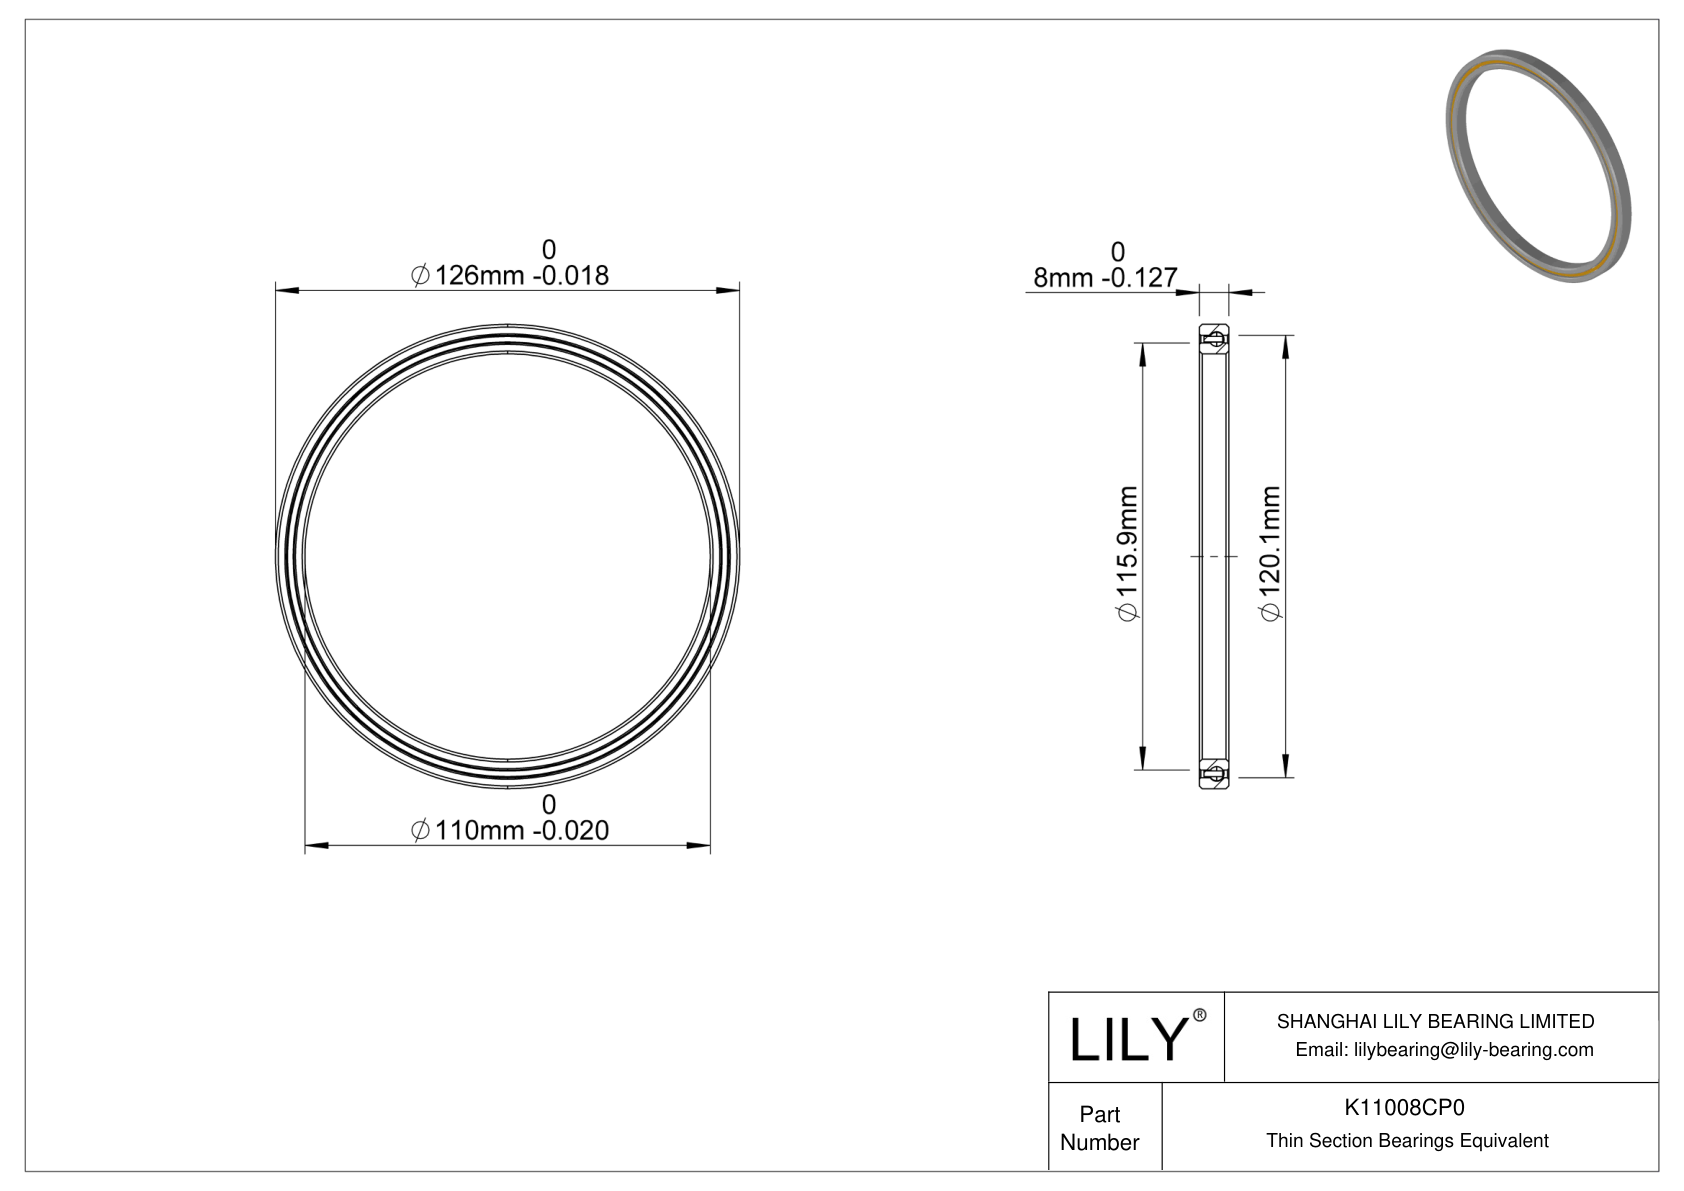 K11008CP0 Constant Section (CS) Bearings cad drawing